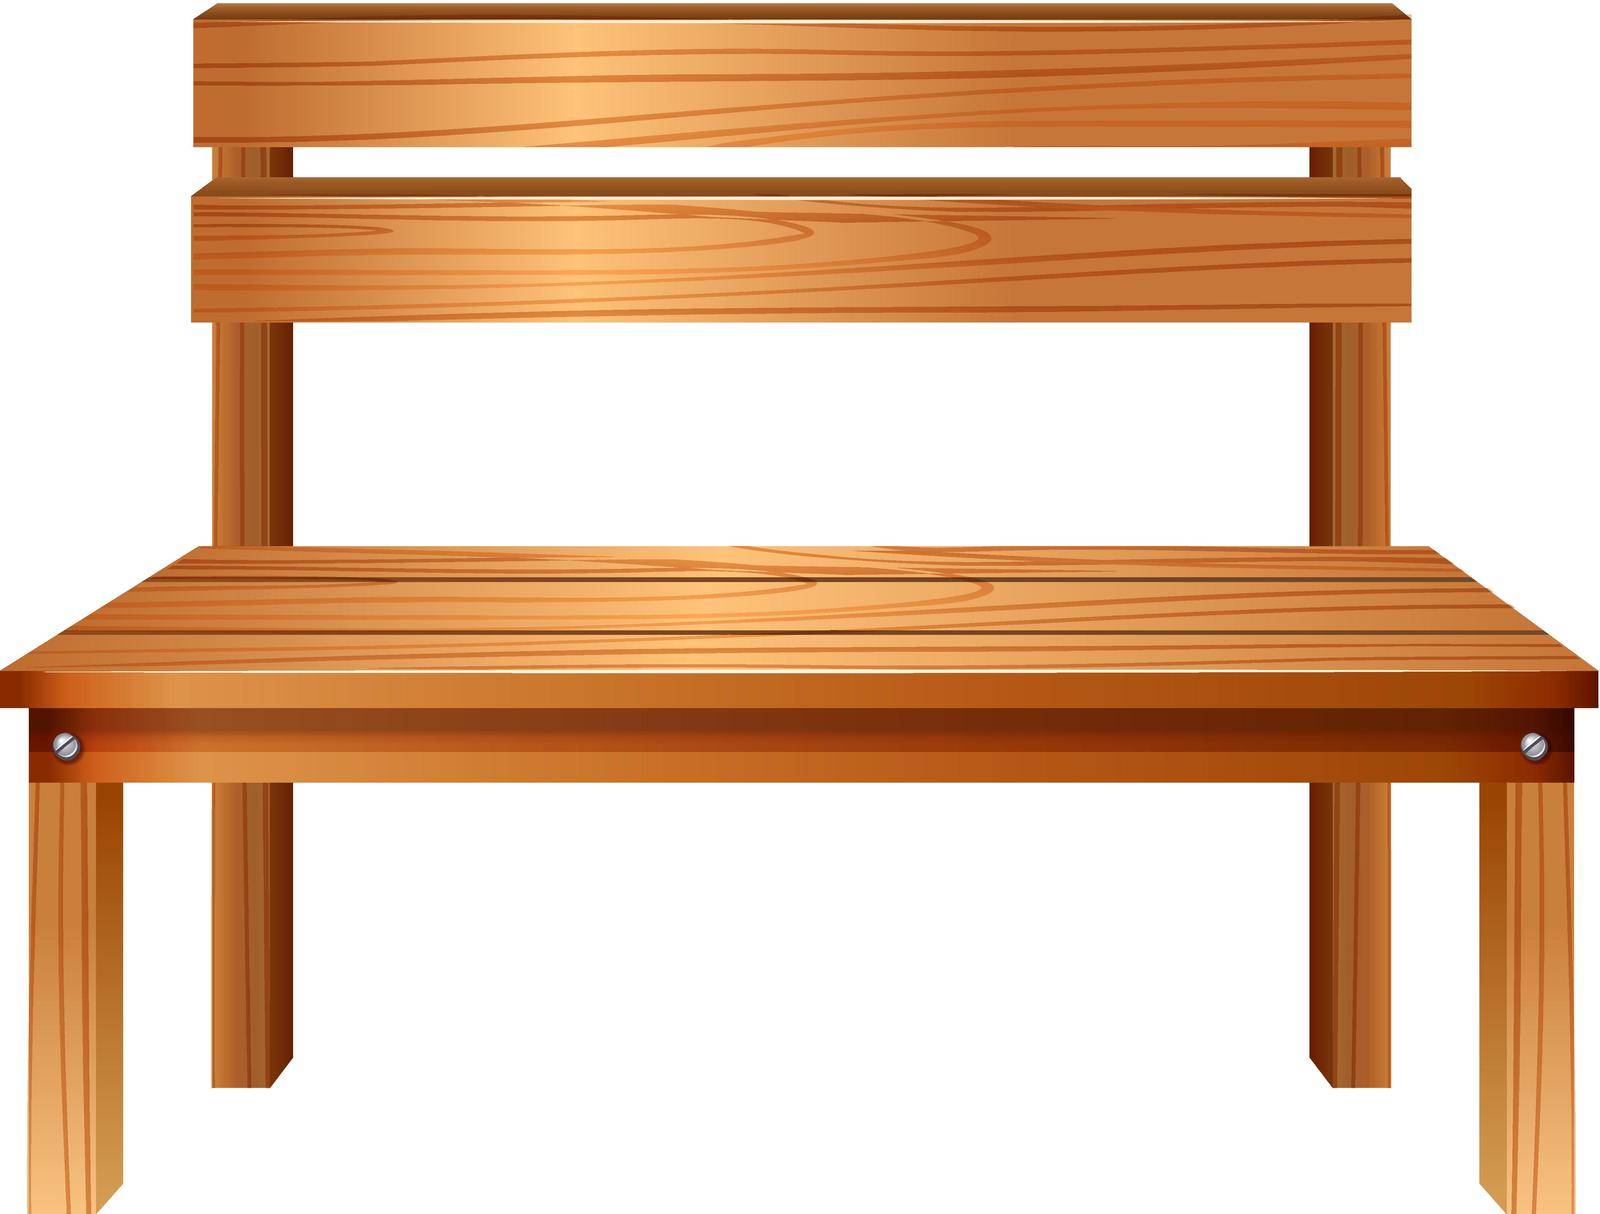 Illustration of a smooth wooden furniture on a white background